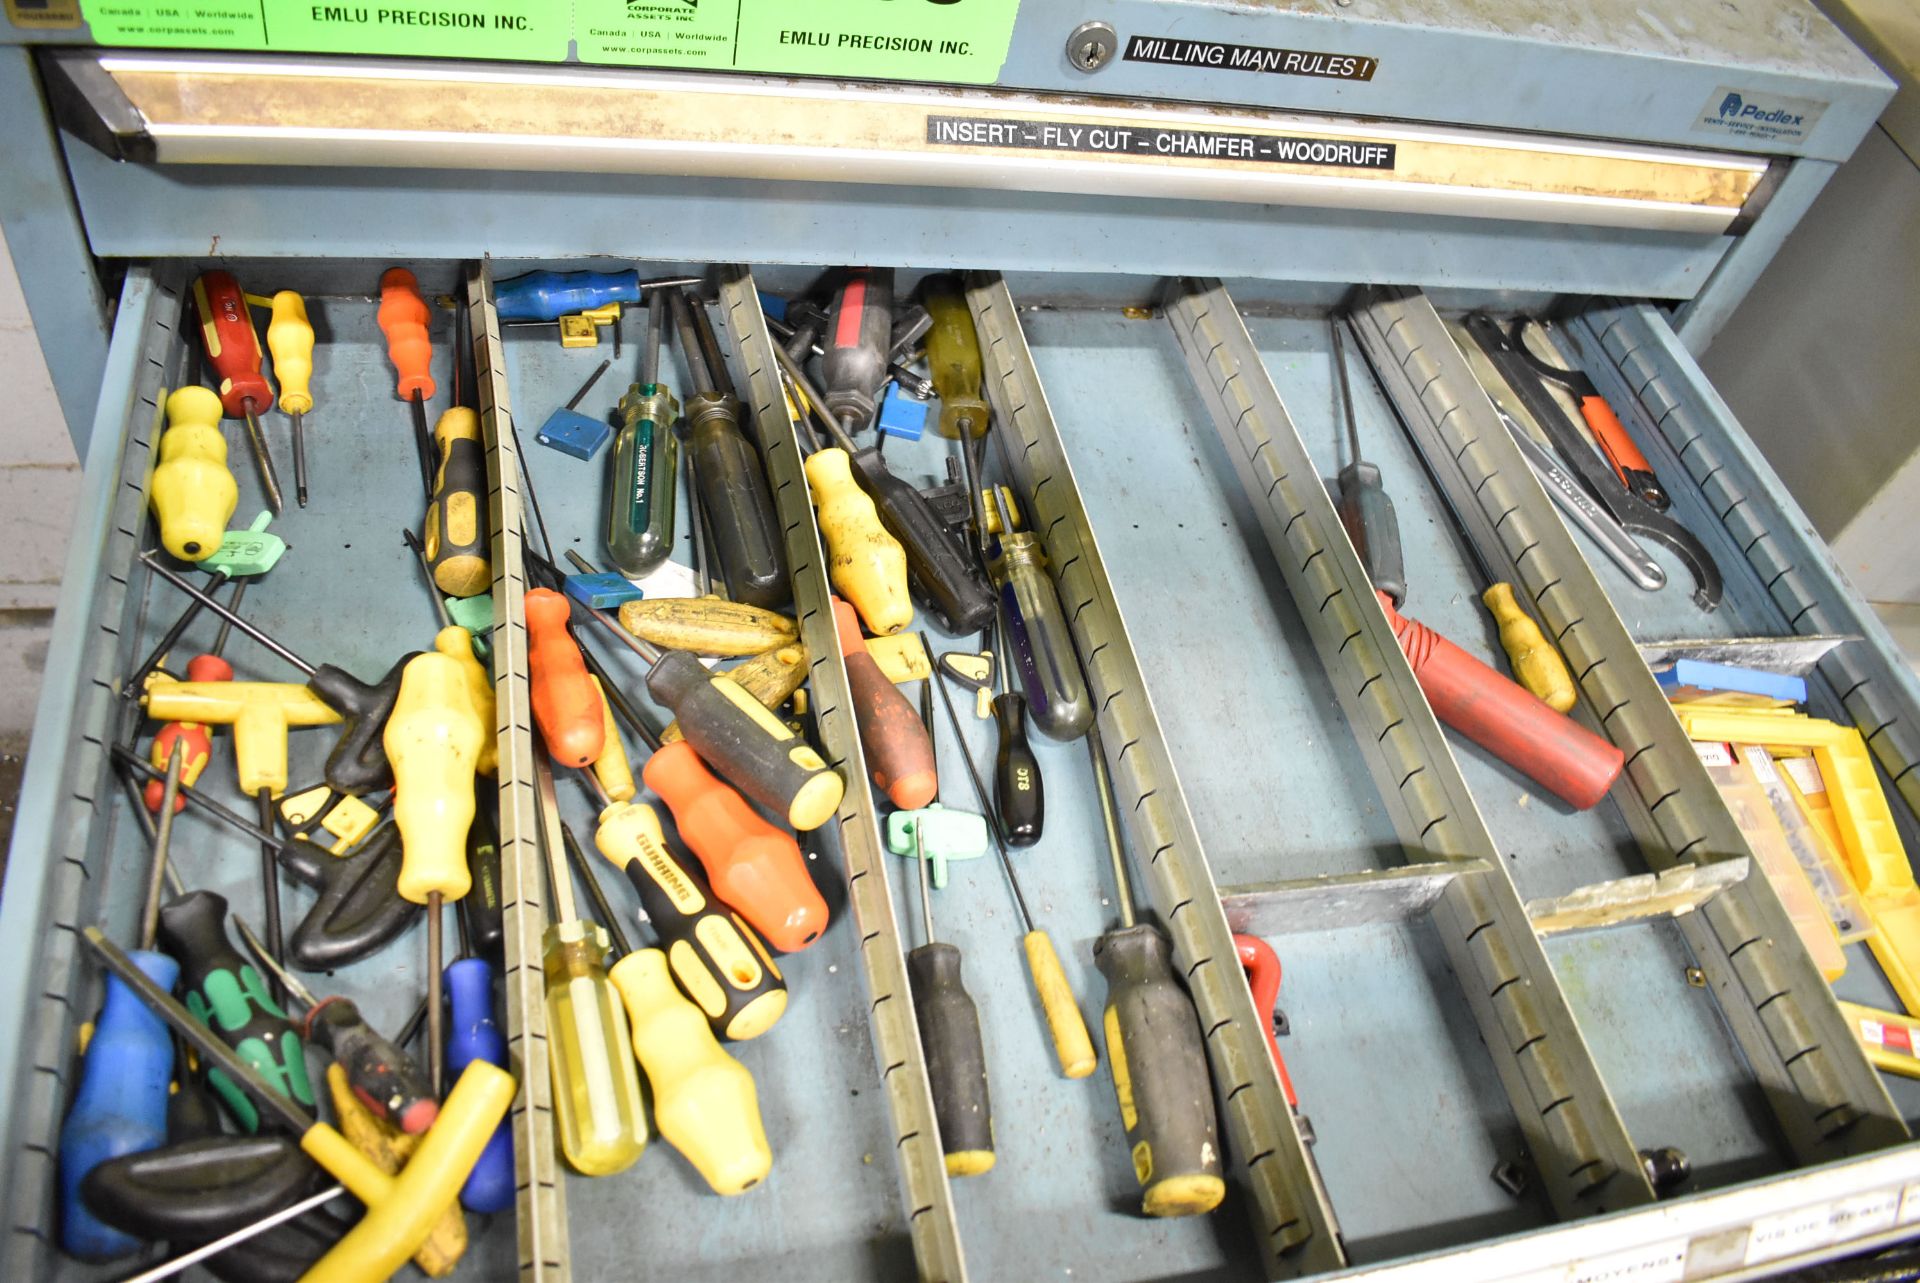 LOT/ CONTENTS OF TOOL CABINET CONSISTING OF HAND TOOLS